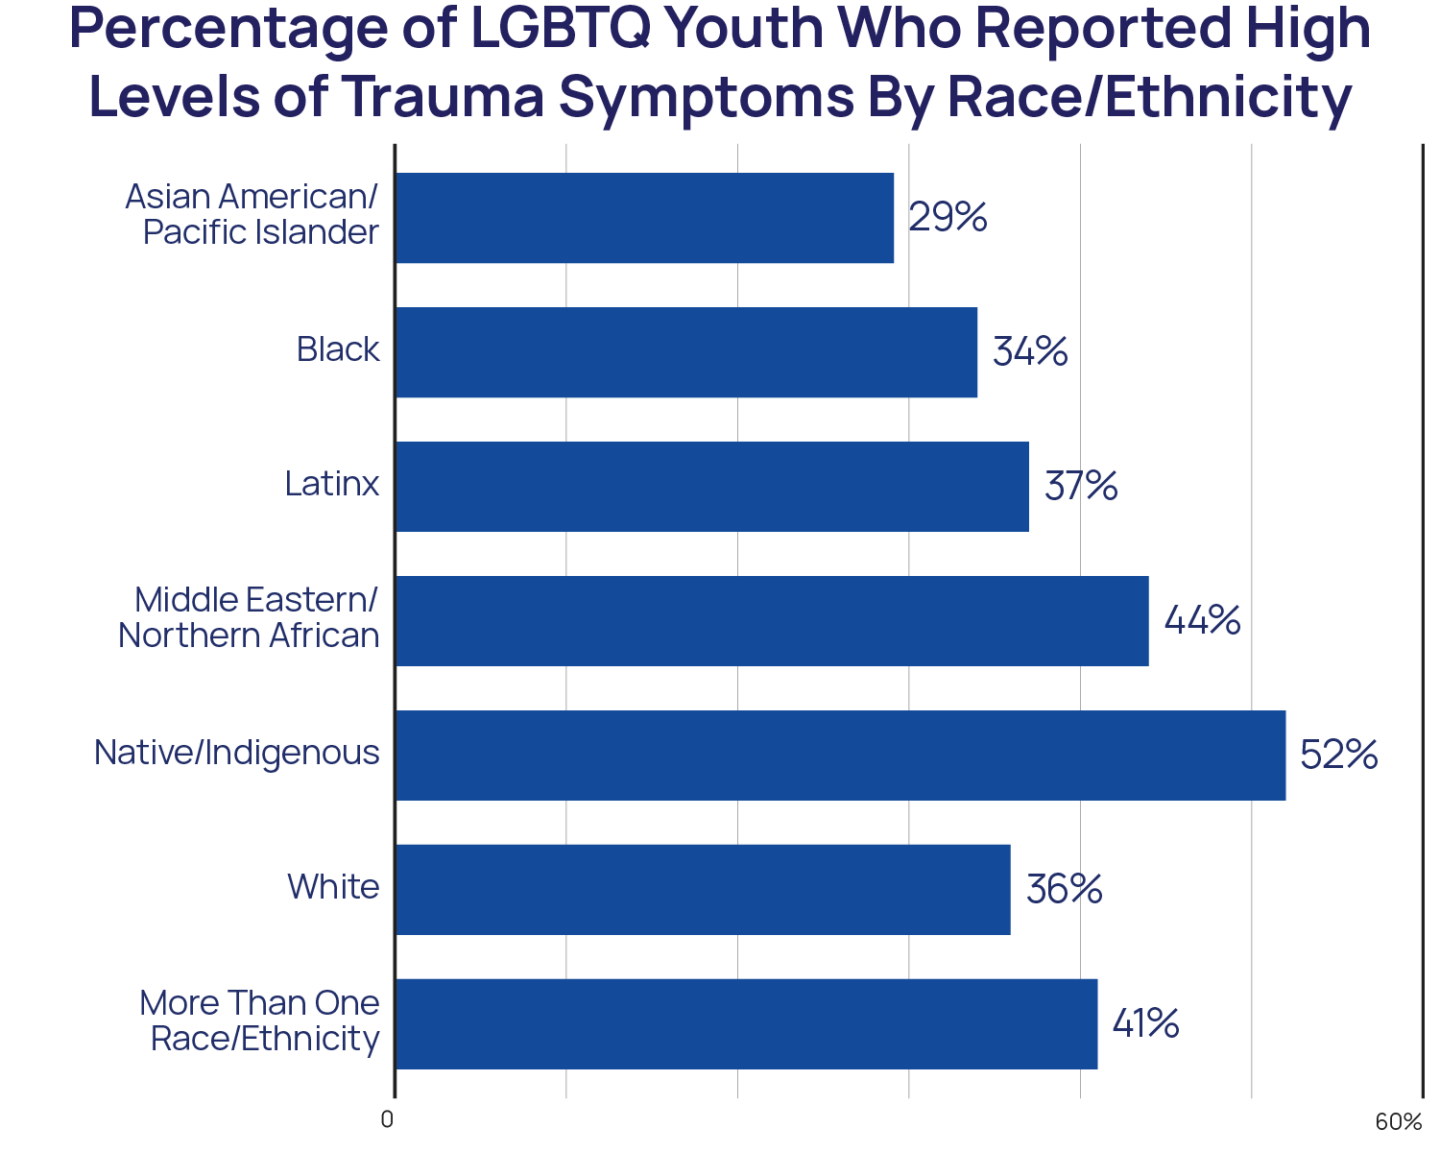 Percentage of LGBTQ Youth Who Reported High Levels of Trauma Symptoms by Race/Ethnicity Bar Chart